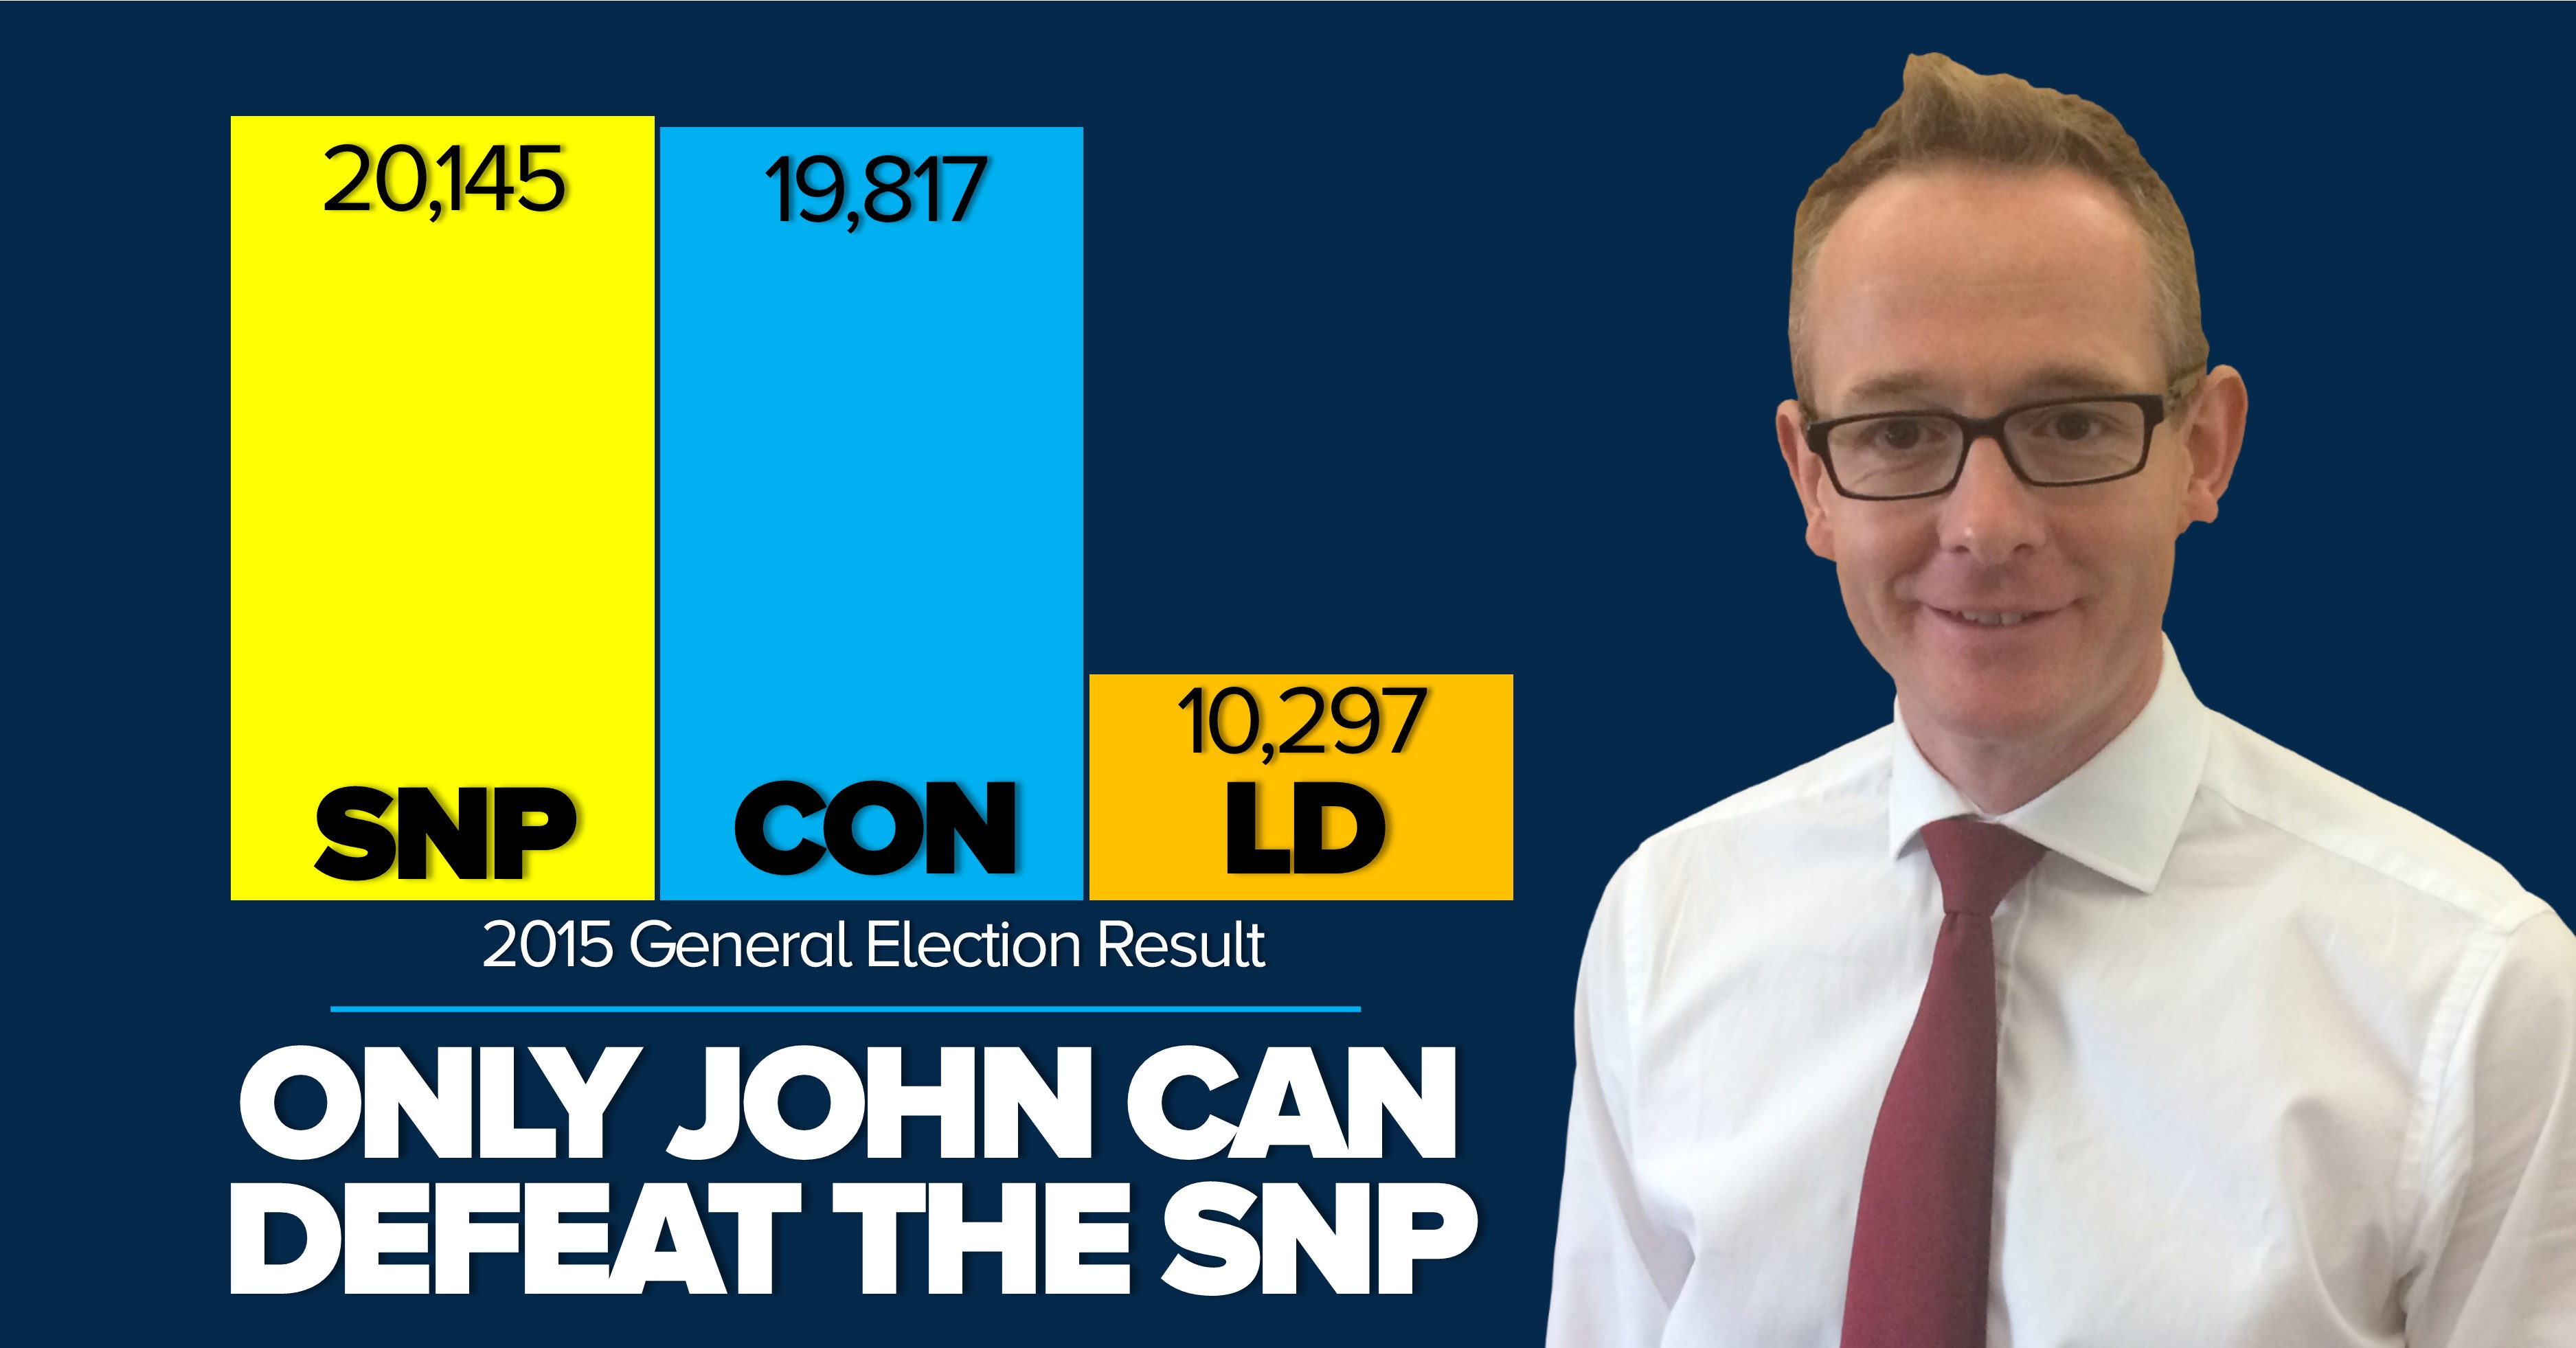 Graph showing it's neck and neck between John & the SNP